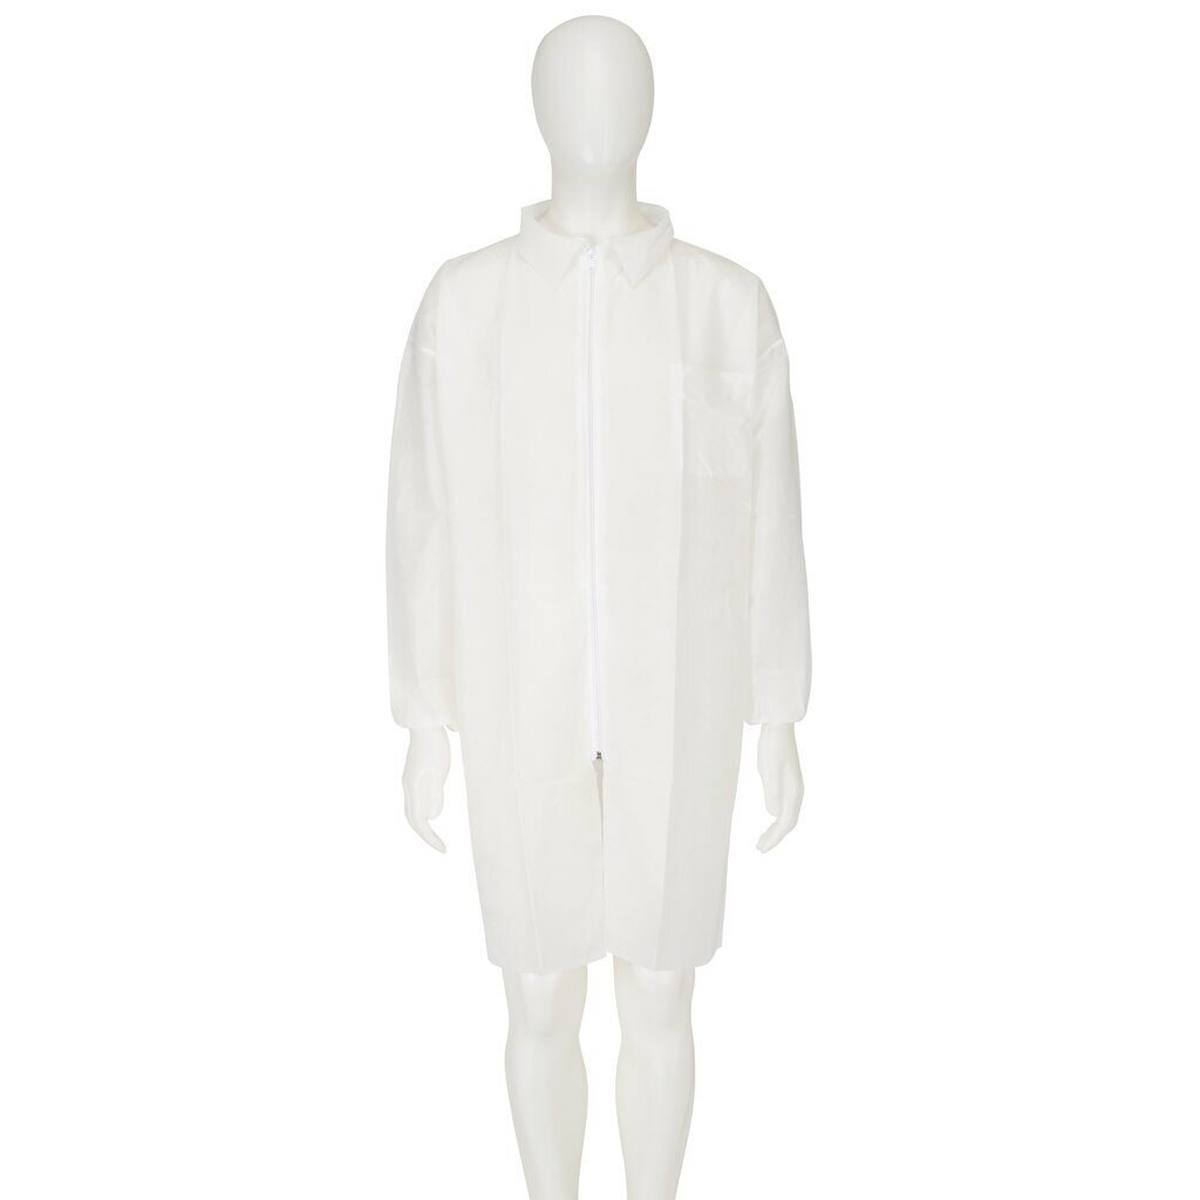 3M 4400 Coat, white, size XL, material 100% polypropylene, breathable, very light, with zip